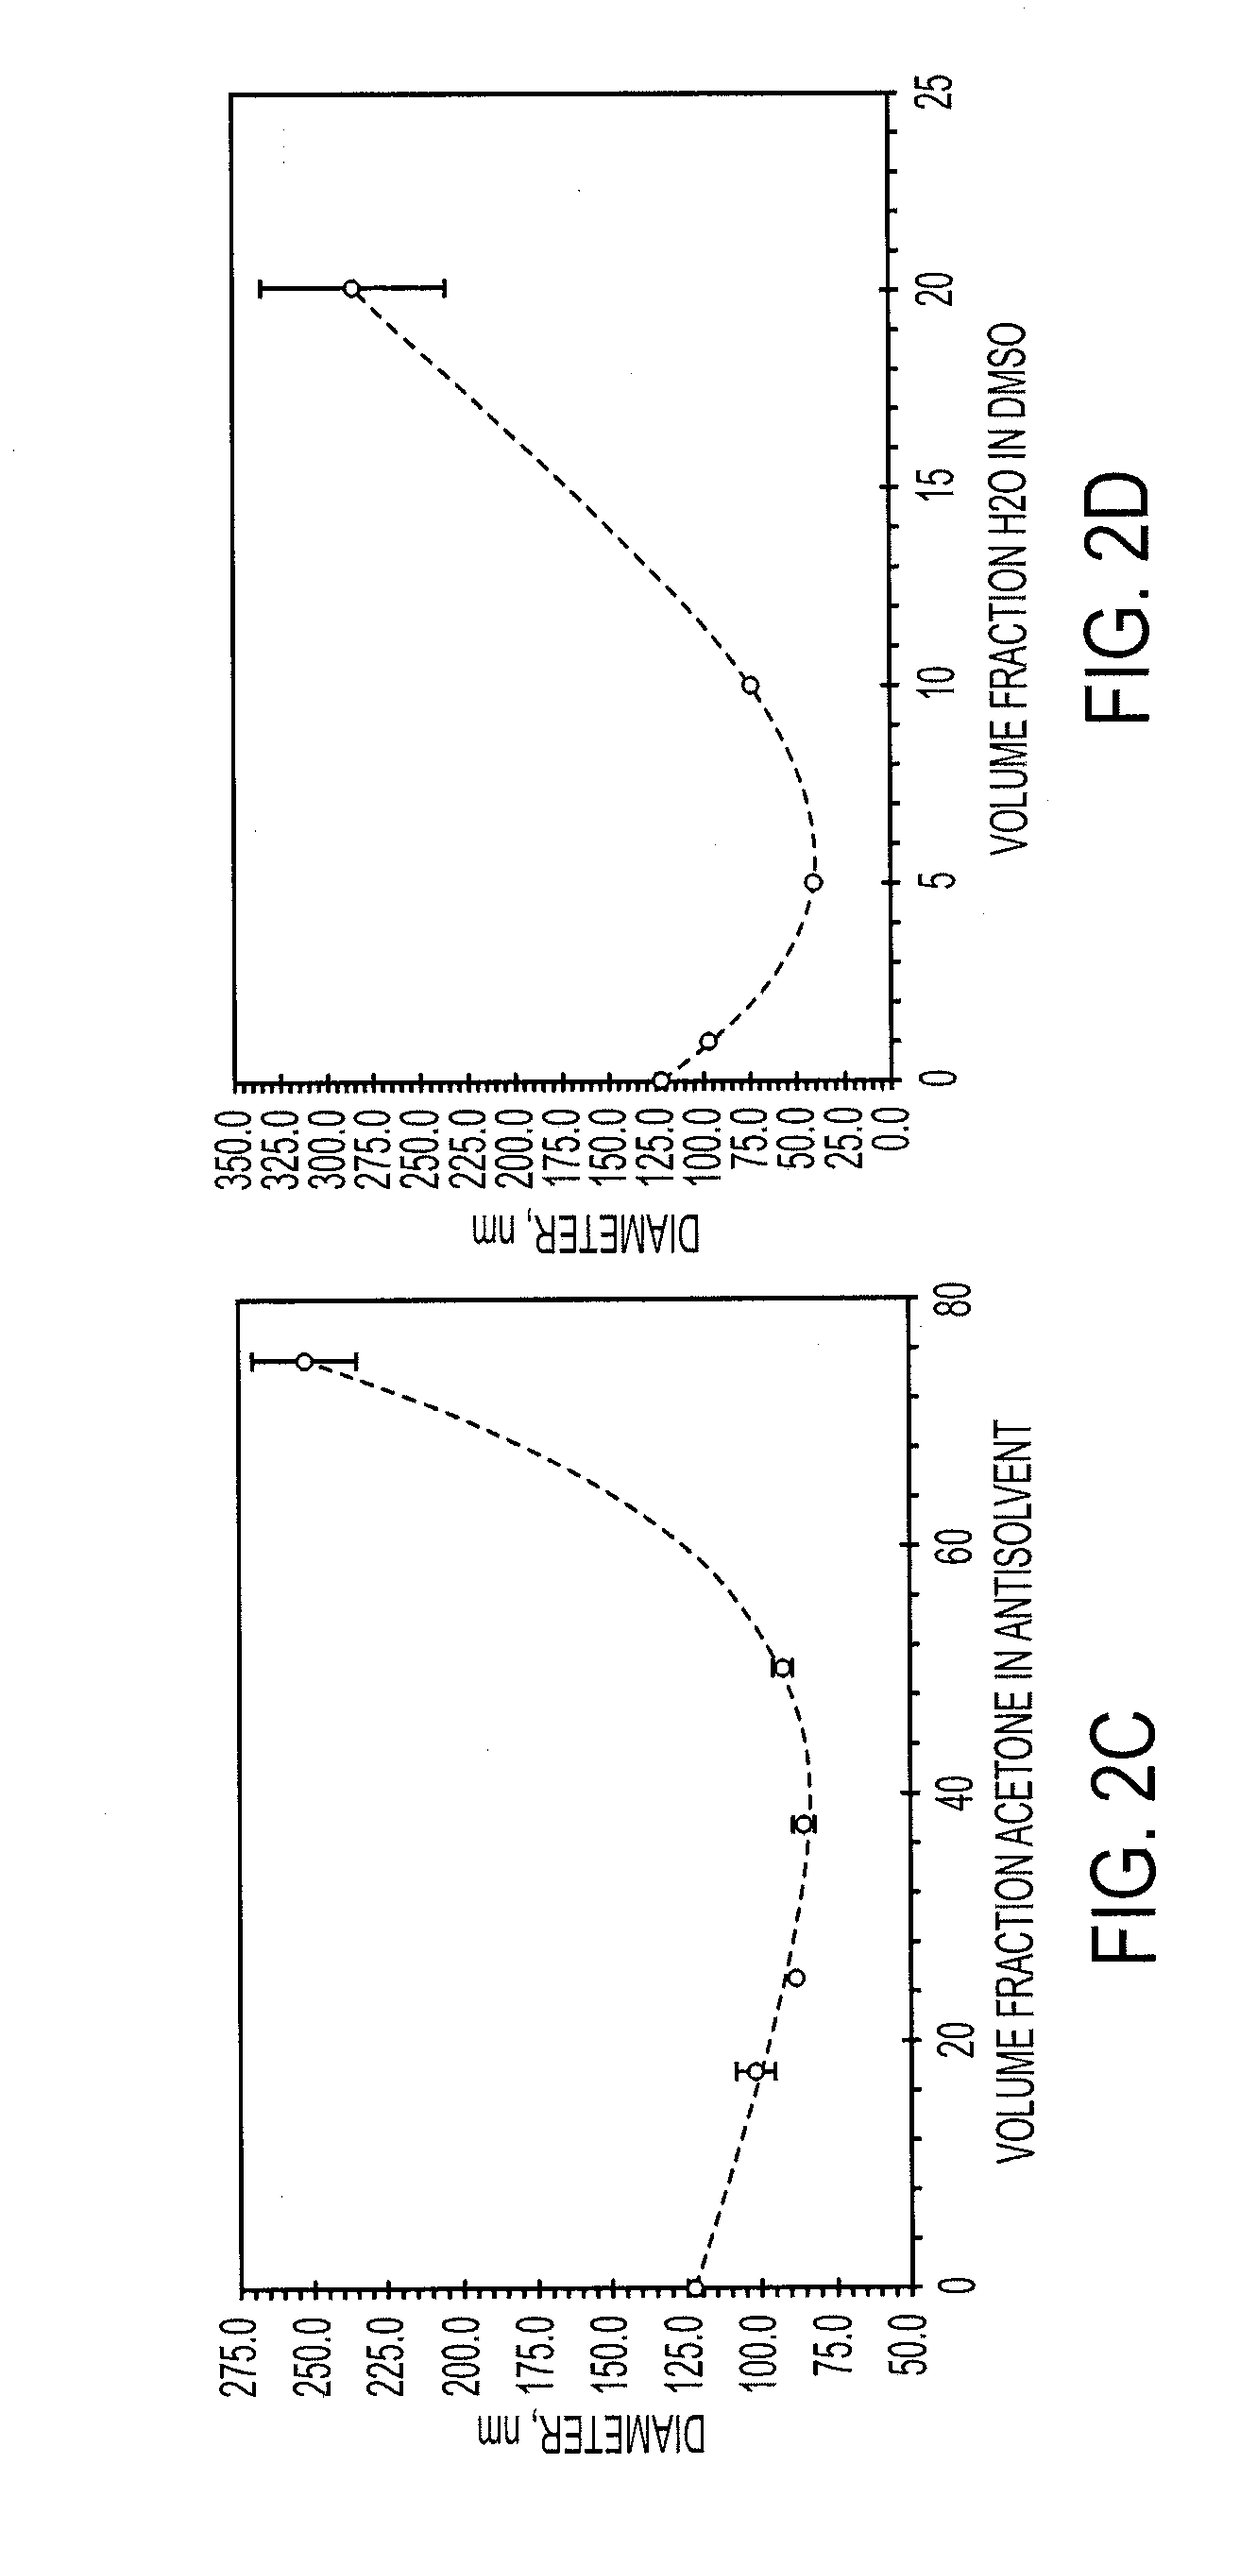 Process for encapsulating soluble biologics, therapeutics, and imaging agents